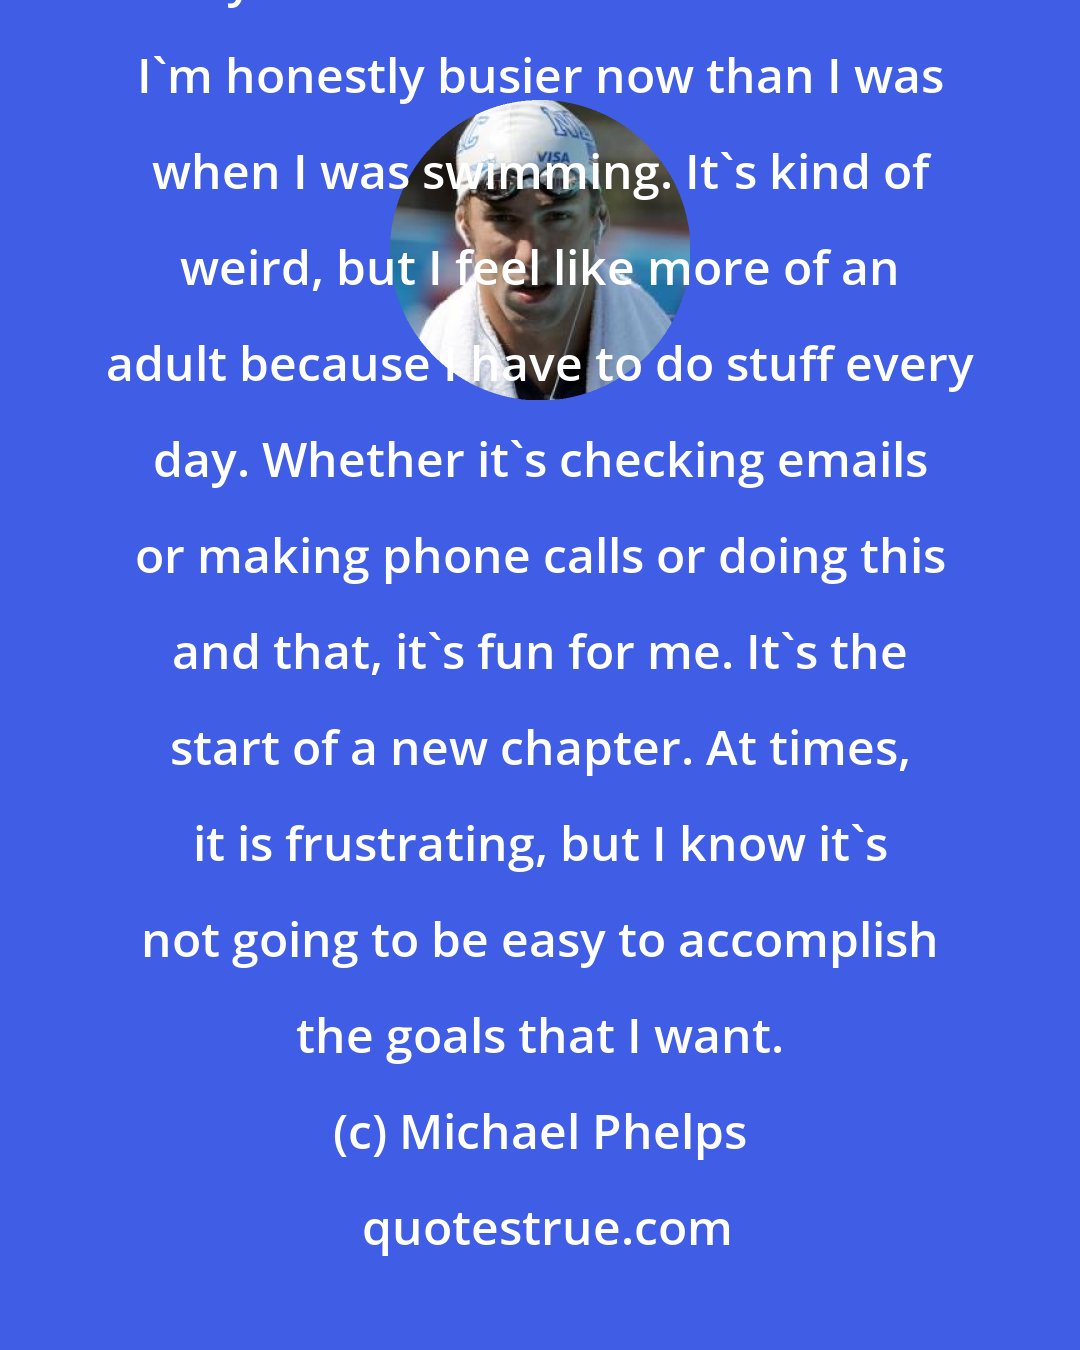 Michael Phelps: There are so many things that I still want to do. My foundation, growing my brand . . . the list is endless. I'm honestly busier now than I was when I was swimming. It's kind of weird, but I feel like more of an adult because I have to do stuff every day. Whether it's checking emails or making phone calls or doing this and that, it's fun for me. It's the start of a new chapter. At times, it is frustrating, but I know it's not going to be easy to accomplish the goals that I want.